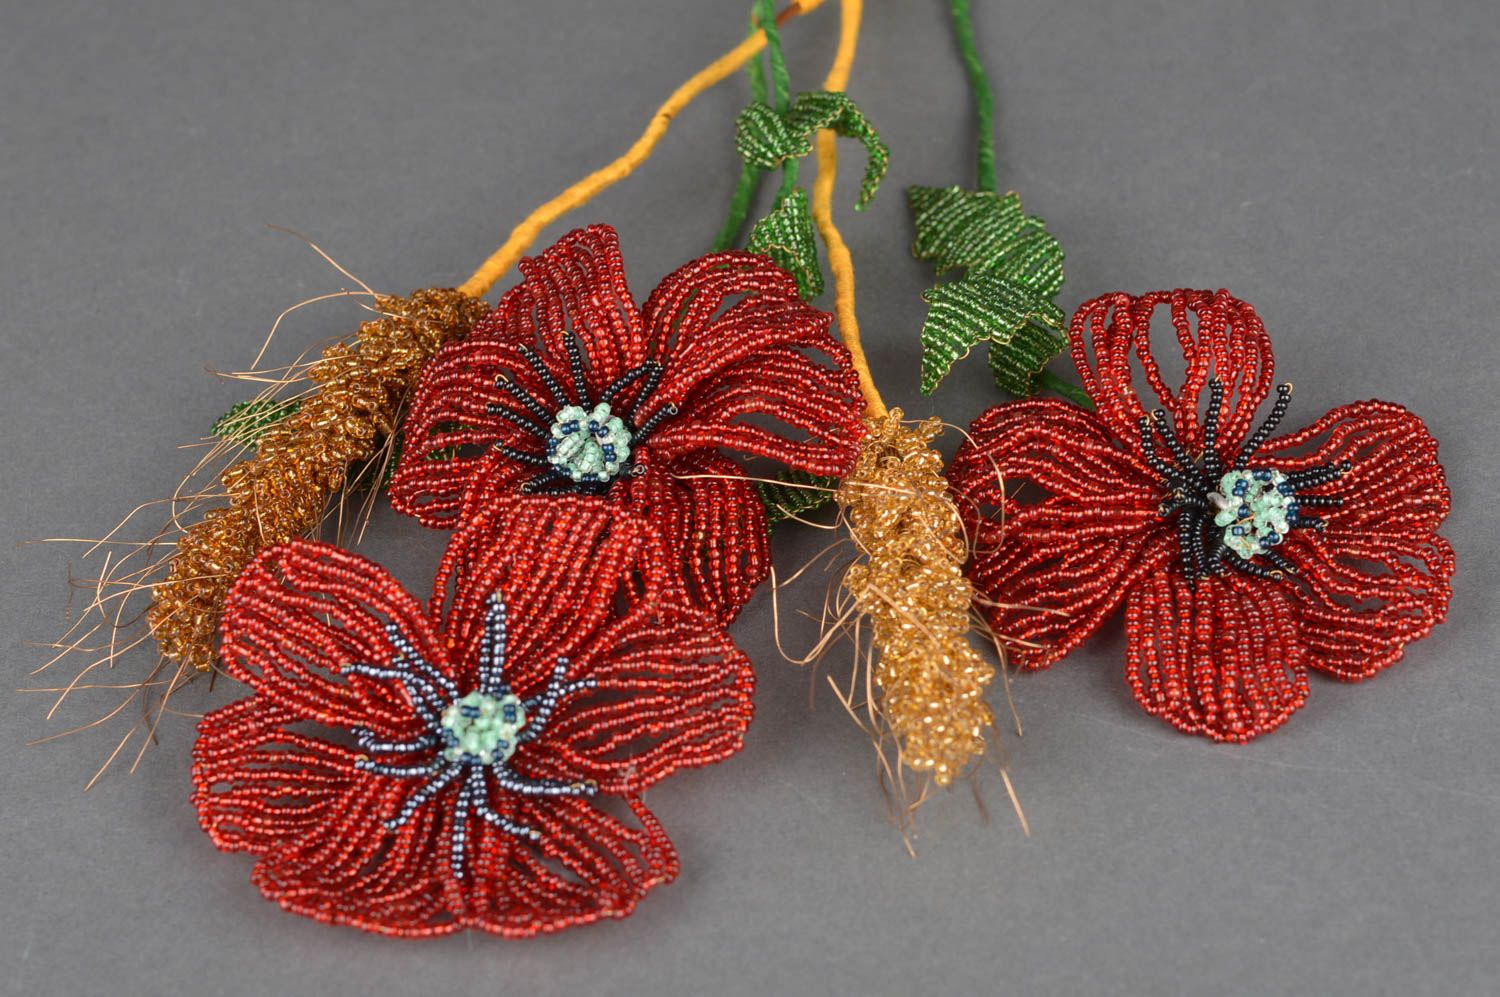 Decorative flowers made of beads Wild bouquet 3 poppies and 2 spikelets photo 5